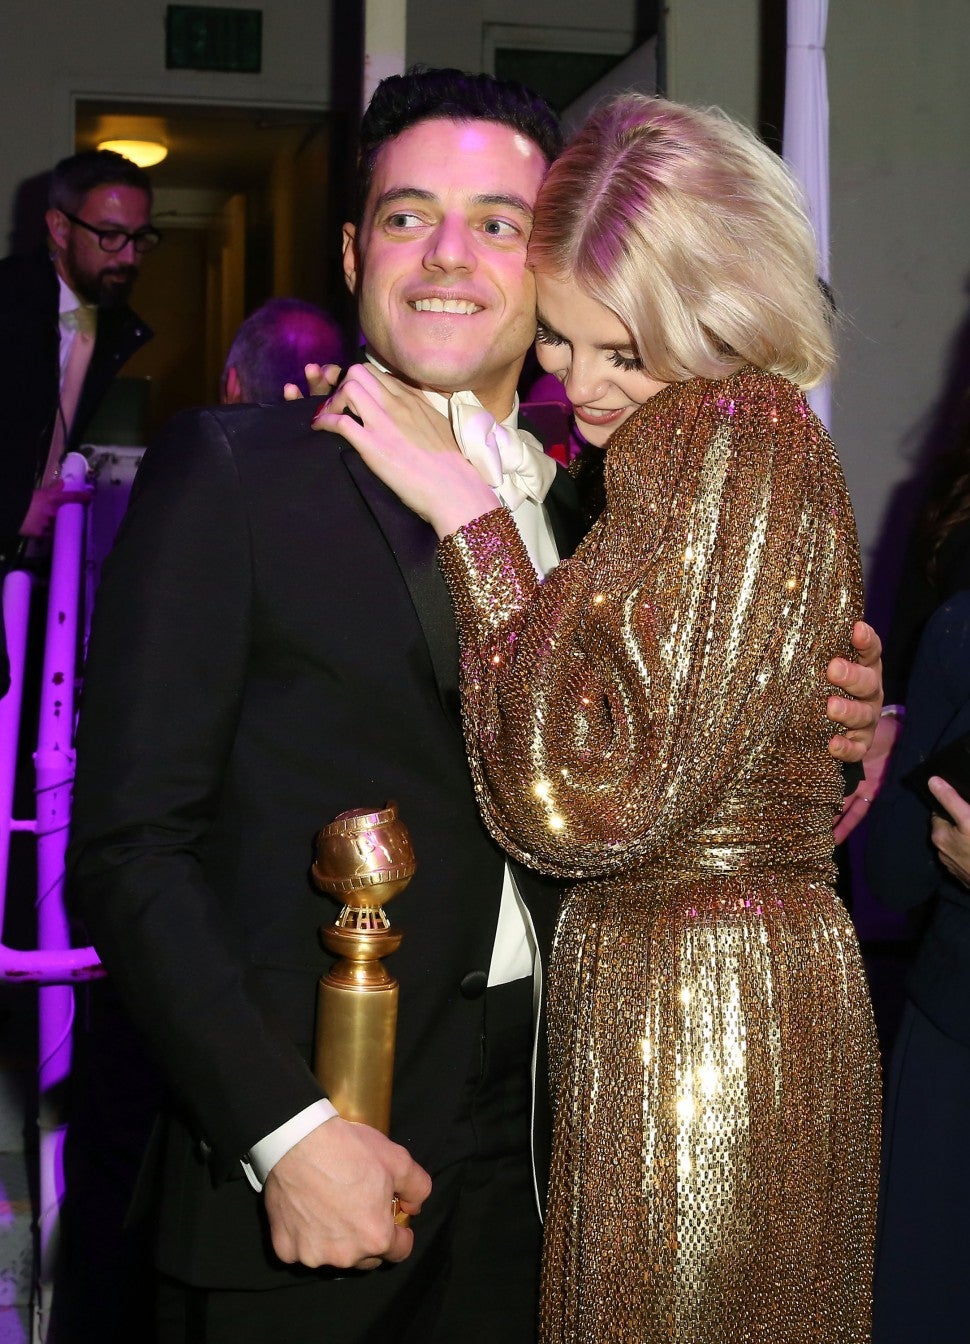 Rami Malek and Lucy Boynton attend the FOX/HULU Golden Globe Awards viewing party and post-show celebration at The Beverly Hilton Hotel on January 6, 2019 in Beverly Hills, California.